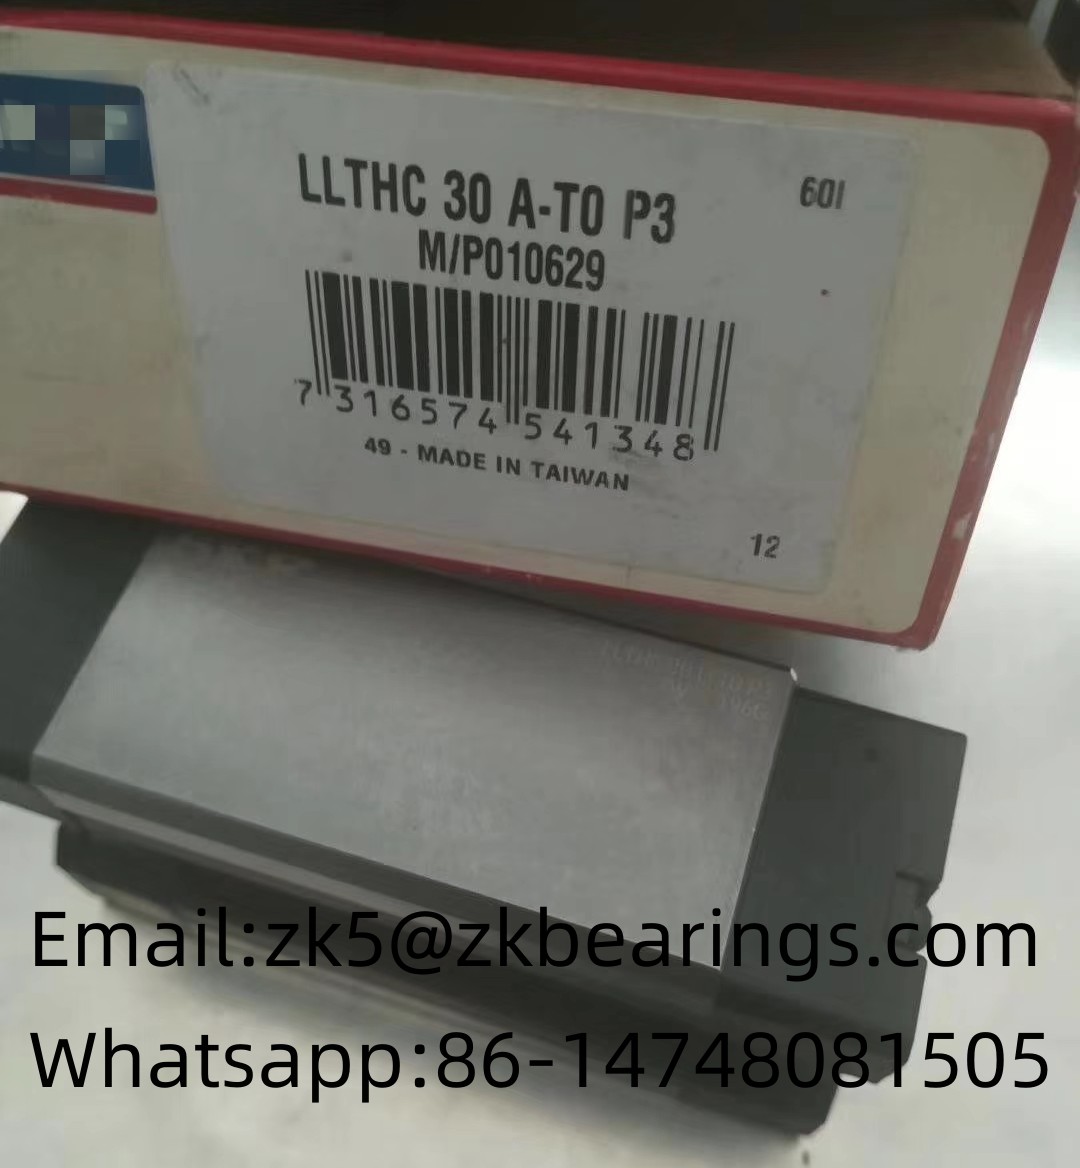 LLTHC 30 LR-T1 P5 Original Square Type Linear Guide Bearing Carriage